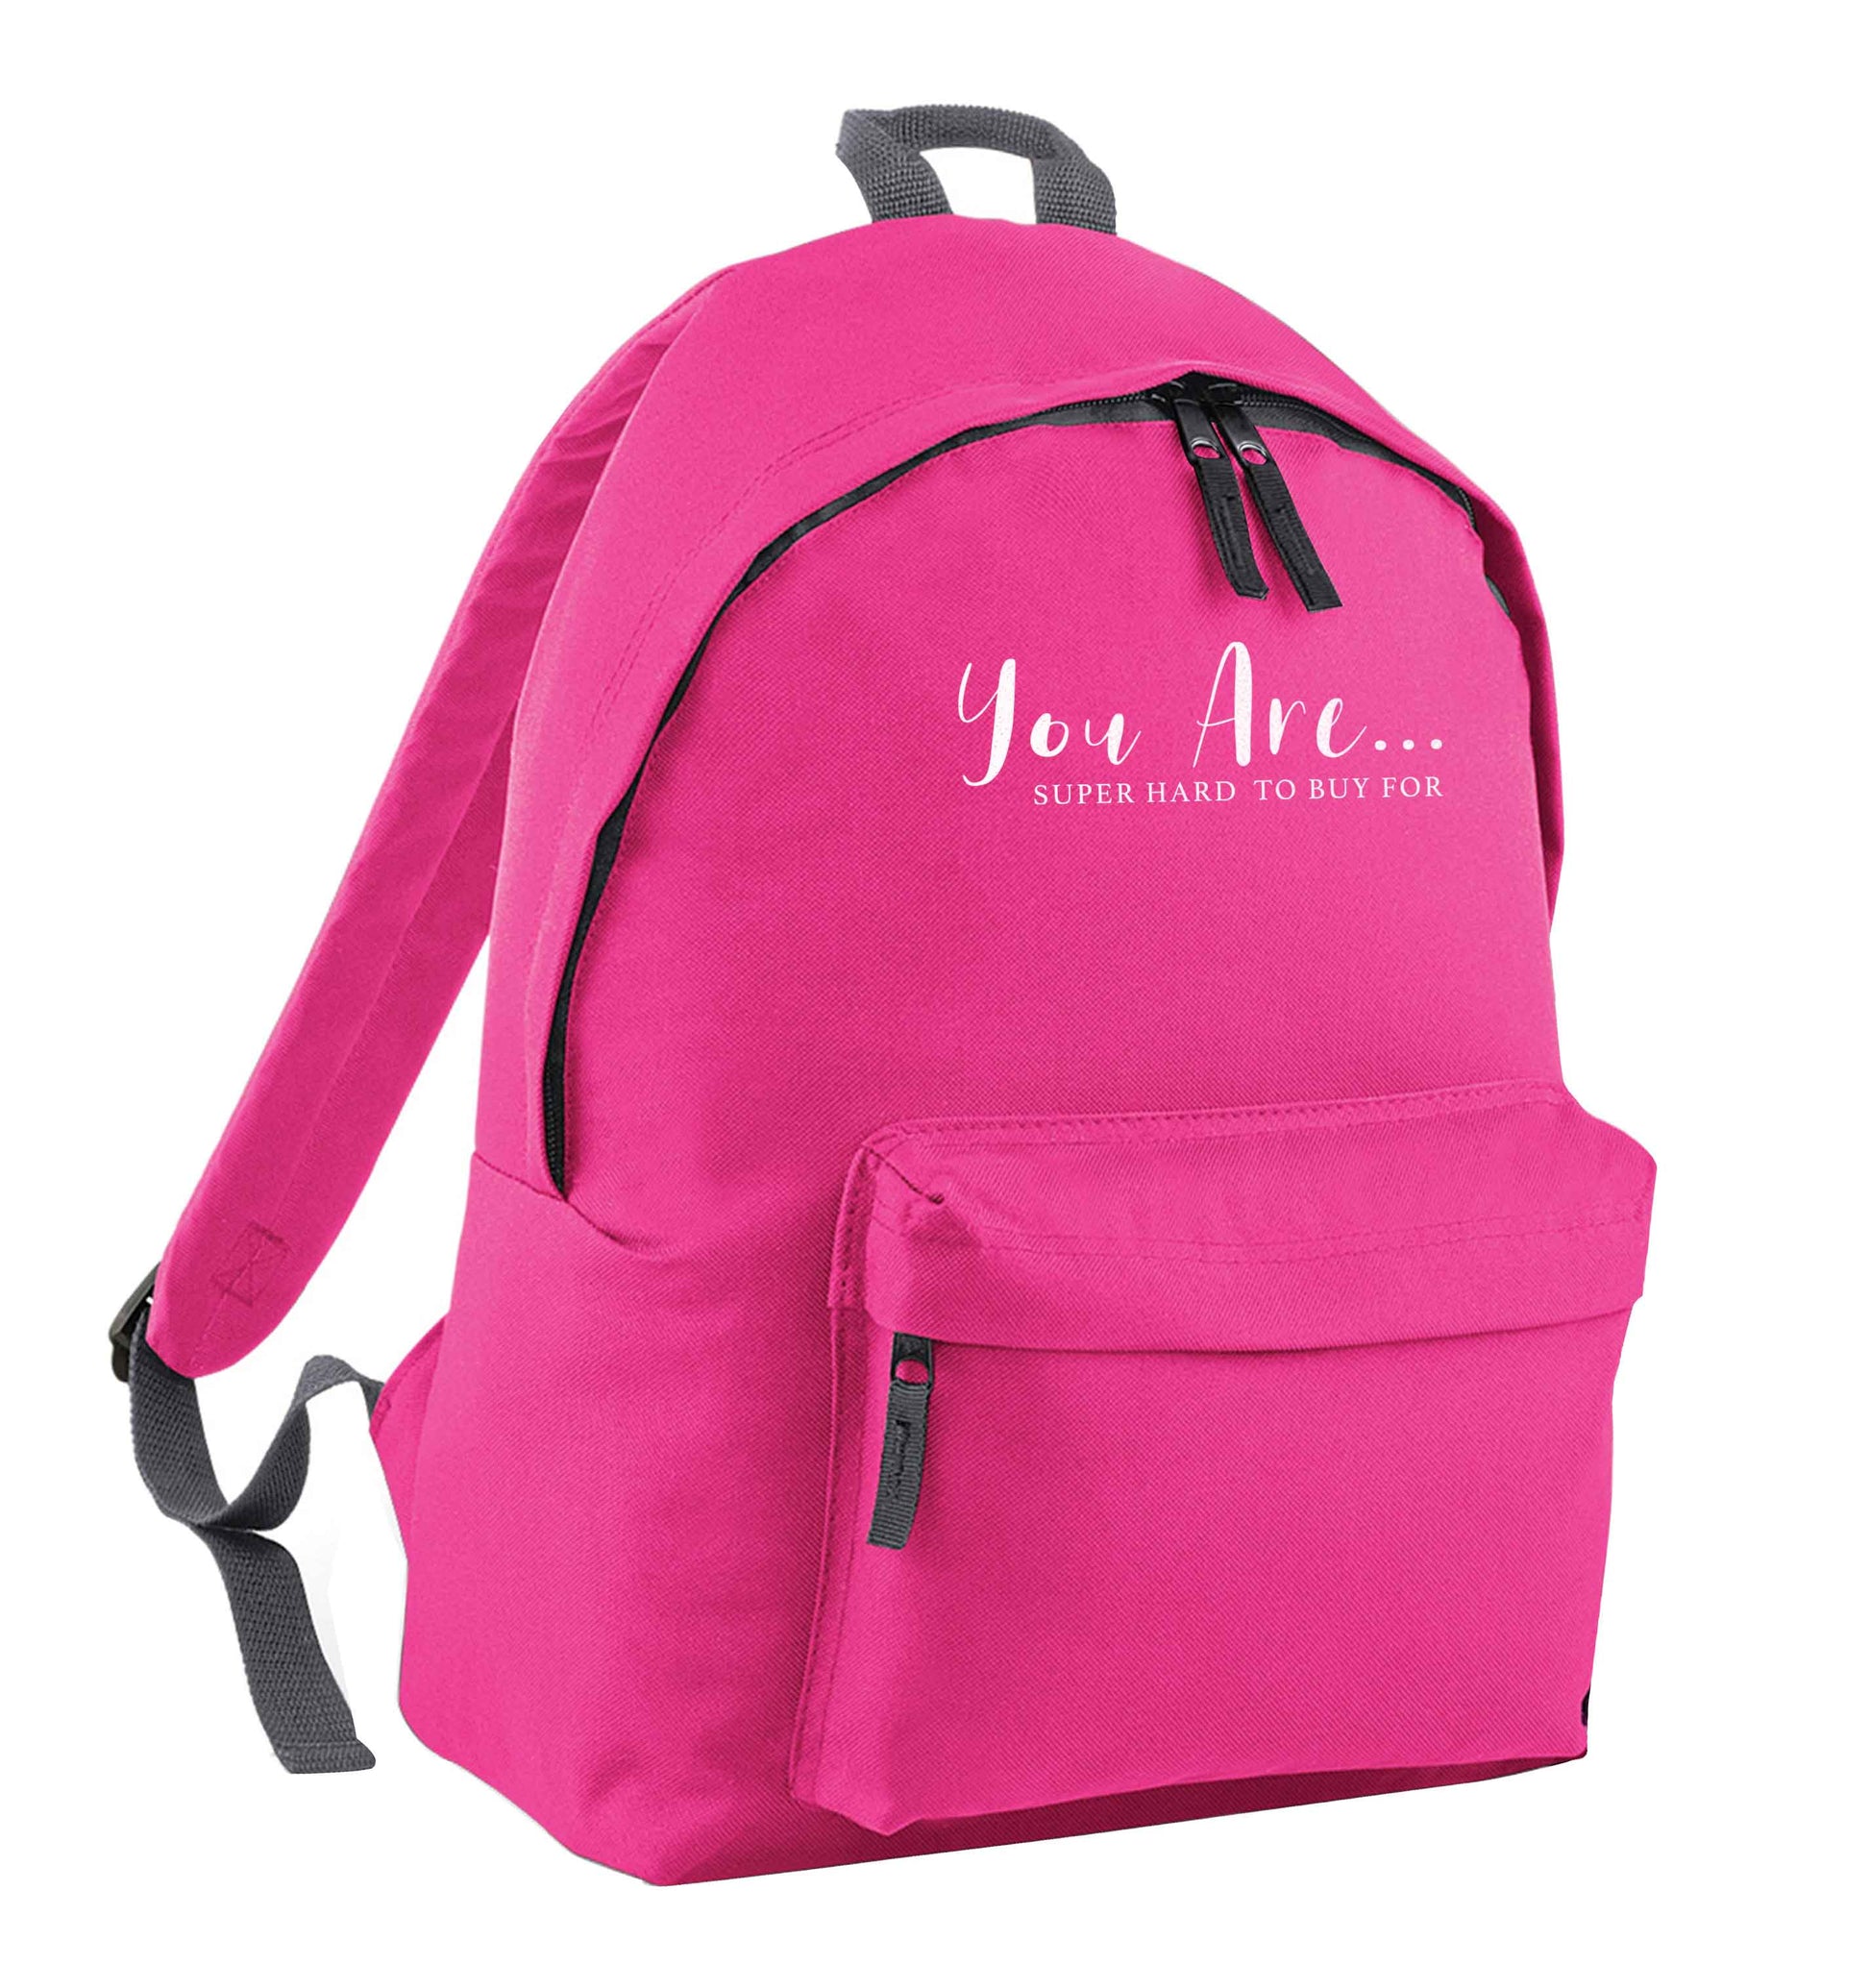 You are super hard to buy for pink adults backpack